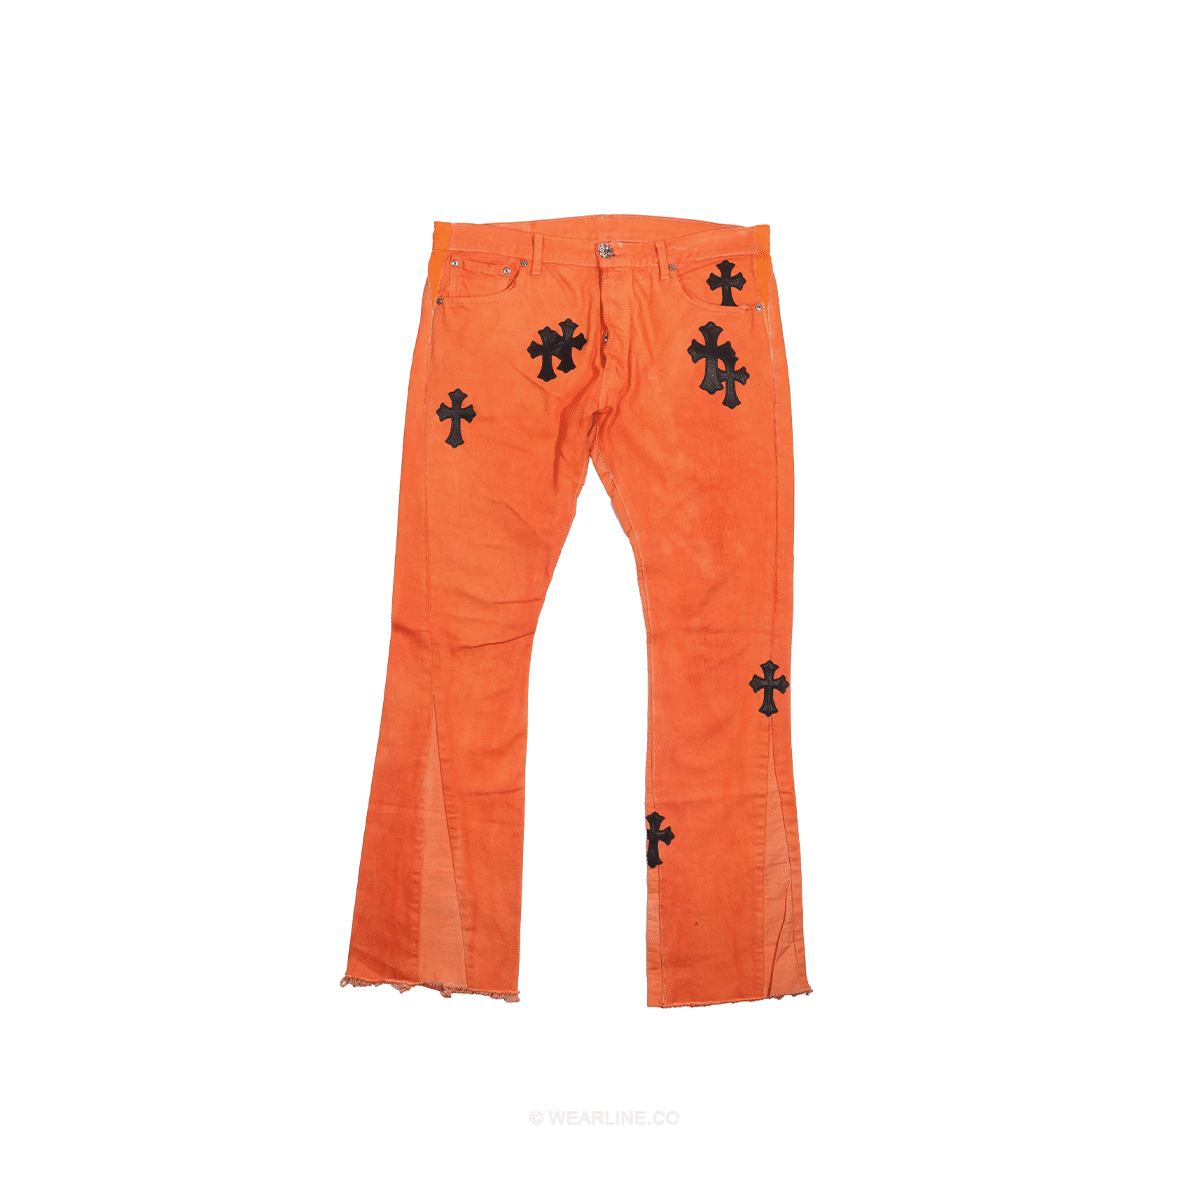 CHROME HEARTS ORANGE JEANS IN BLACK LEATHER CROSS PATCH - ANOSIO